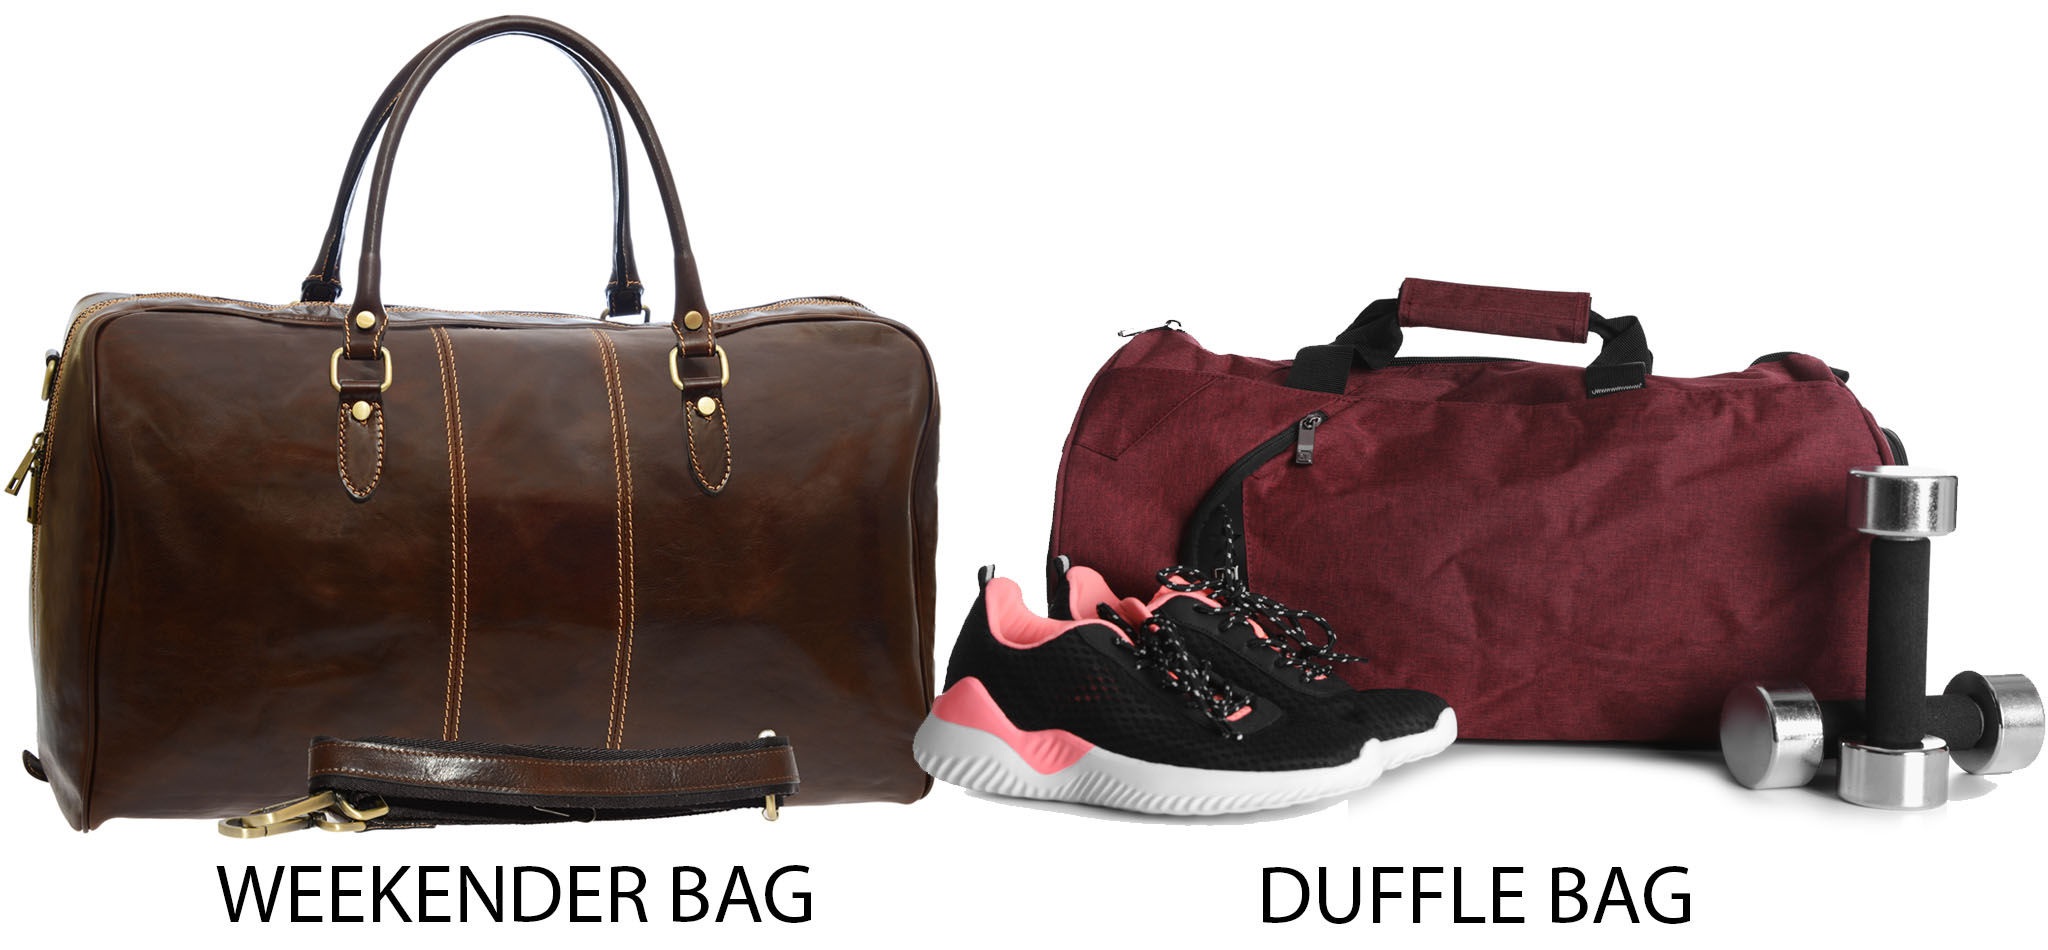 A weekender bag is more structured compared to a duffle bag that's more like a gym bag